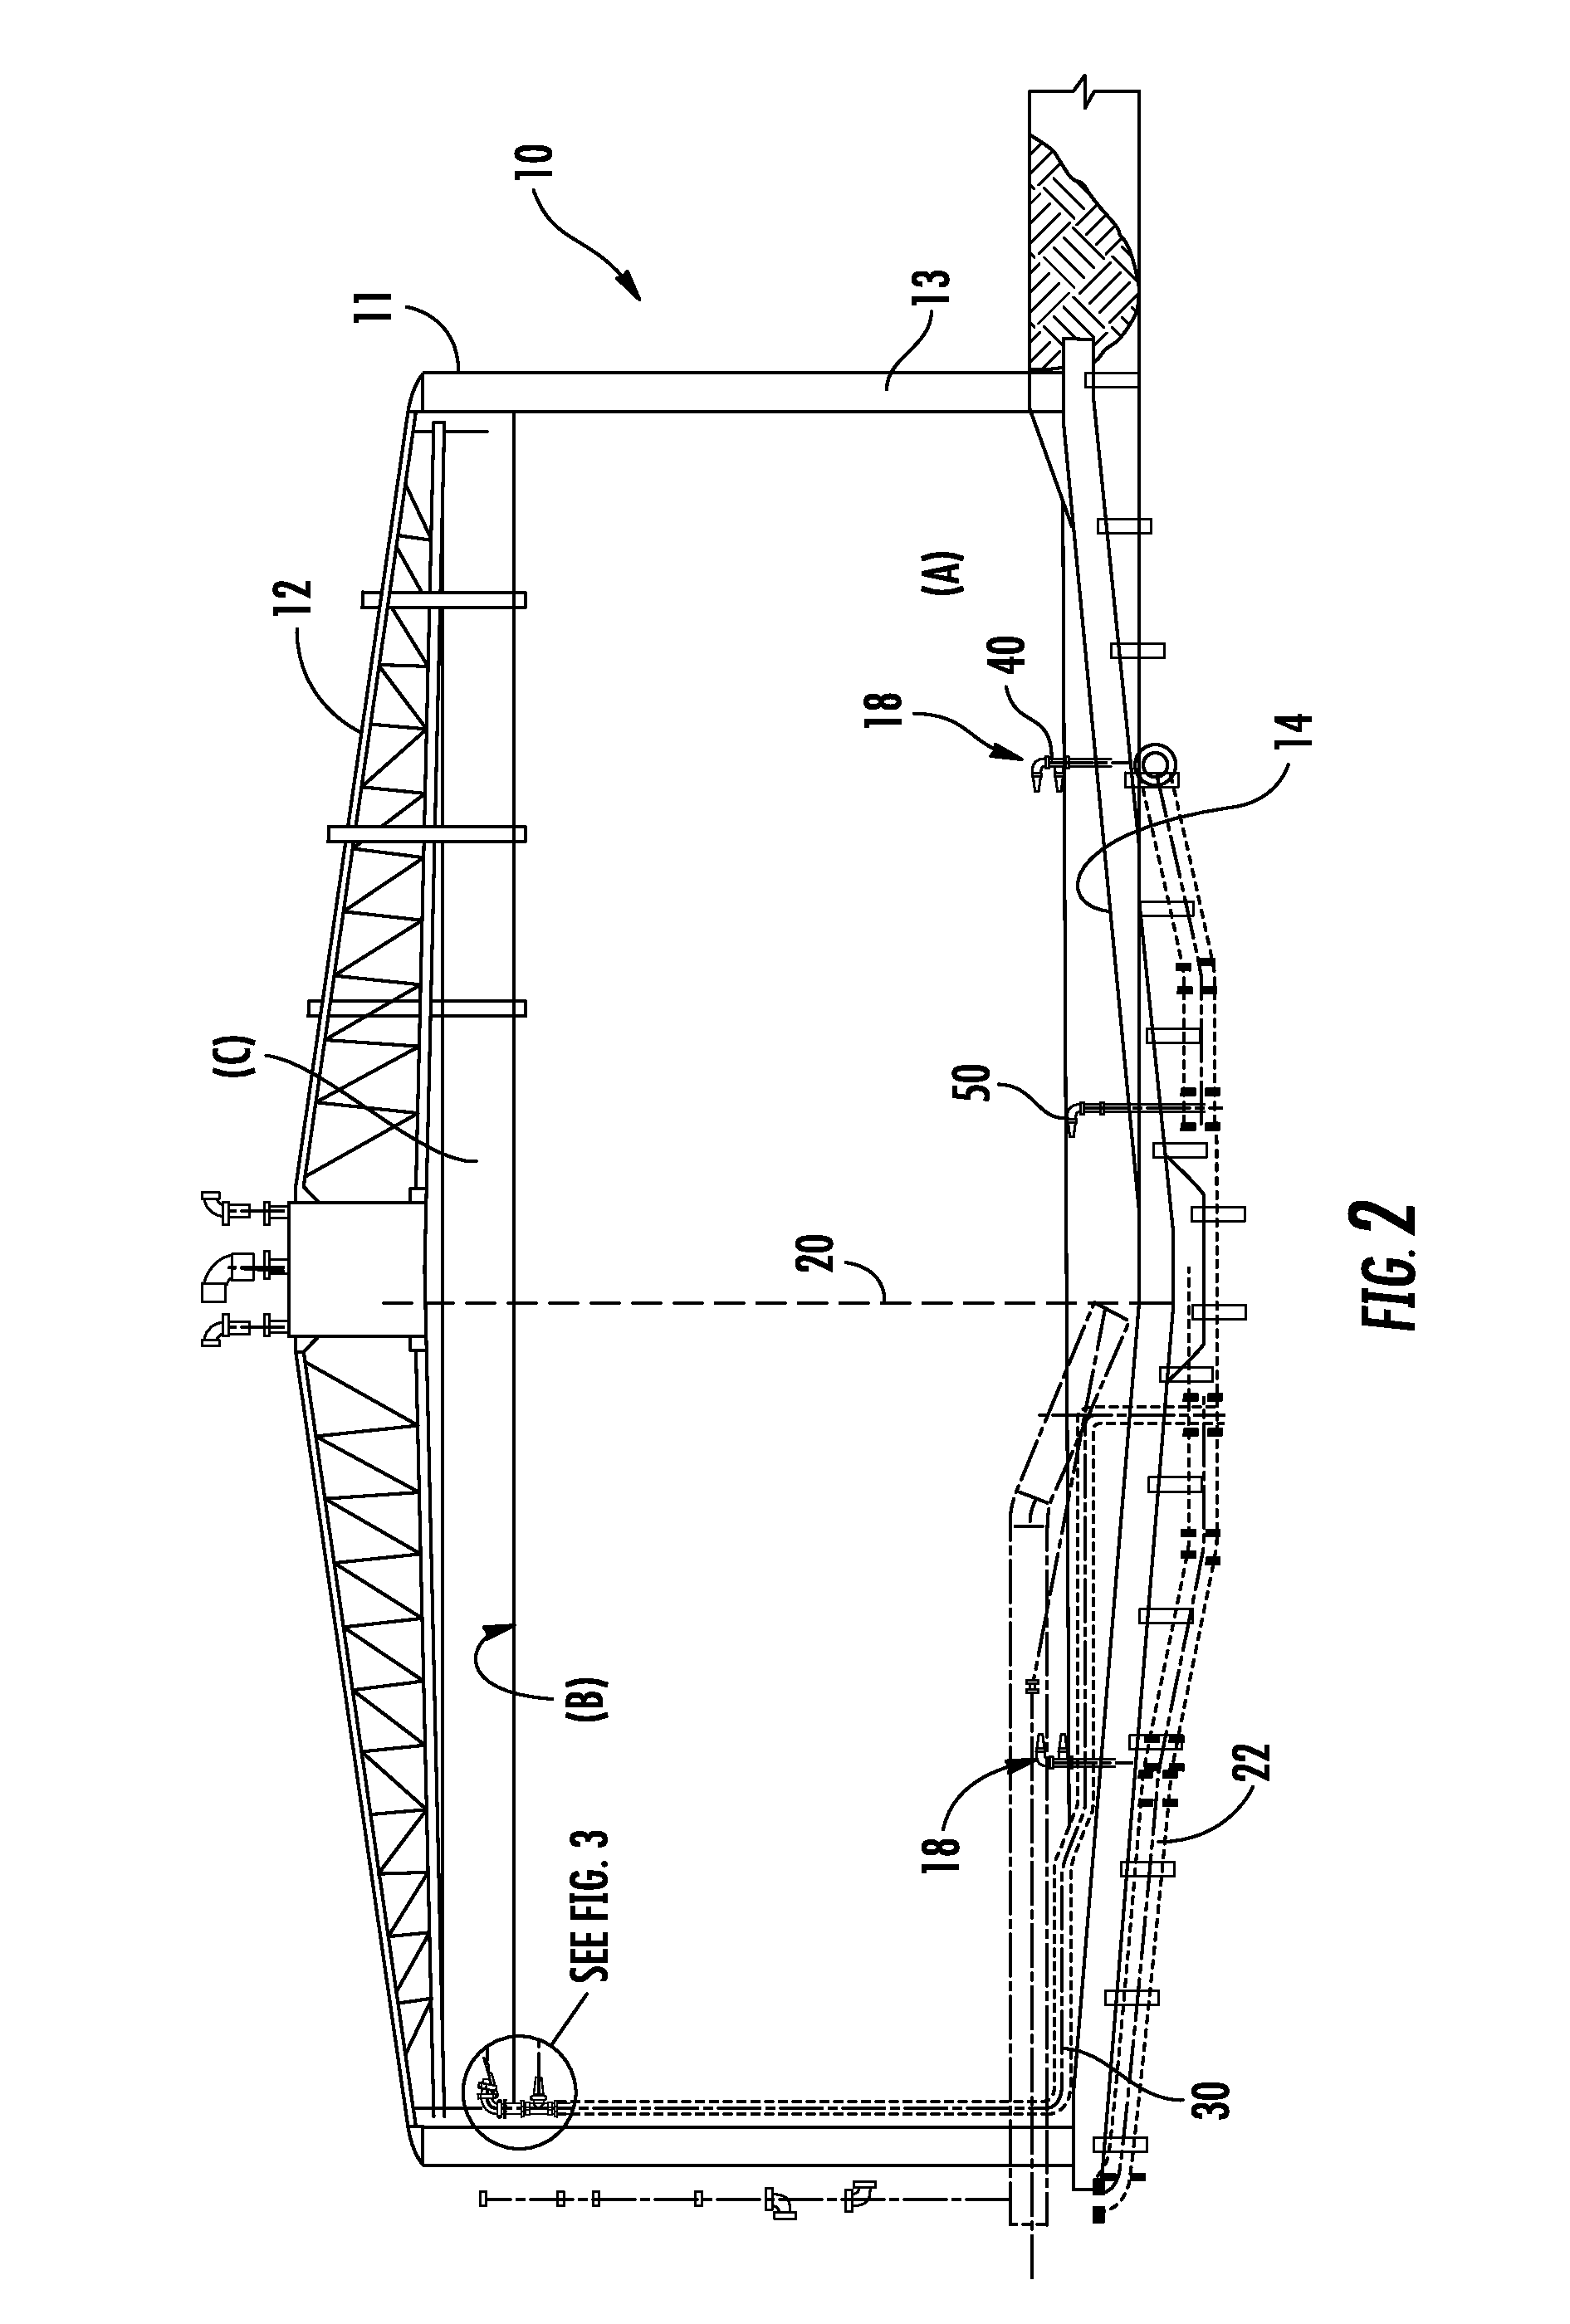 System Having Foam Busting Nozzle and Sub-Surface Mixing Nozzle